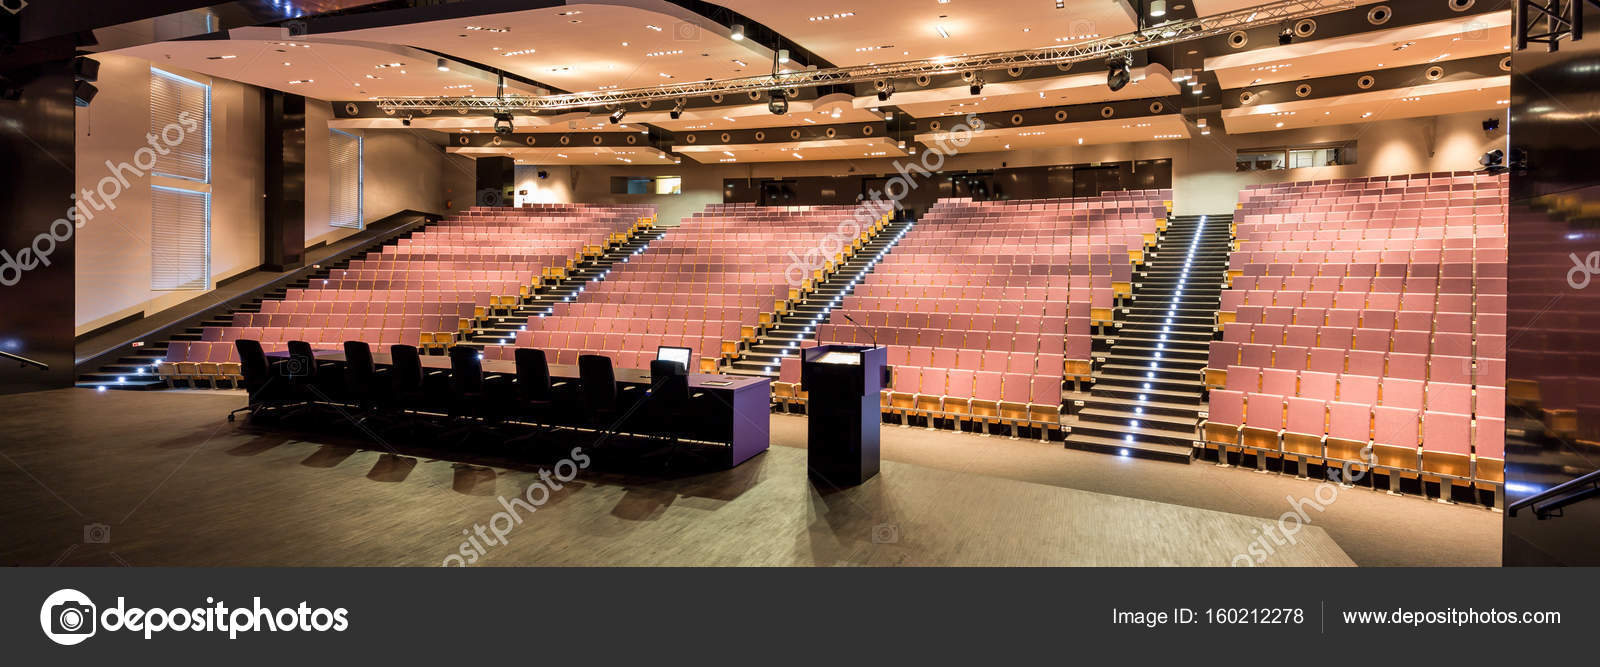 Lecture Hall With Red Seats Stock Photo C Photographee Eu 160212278